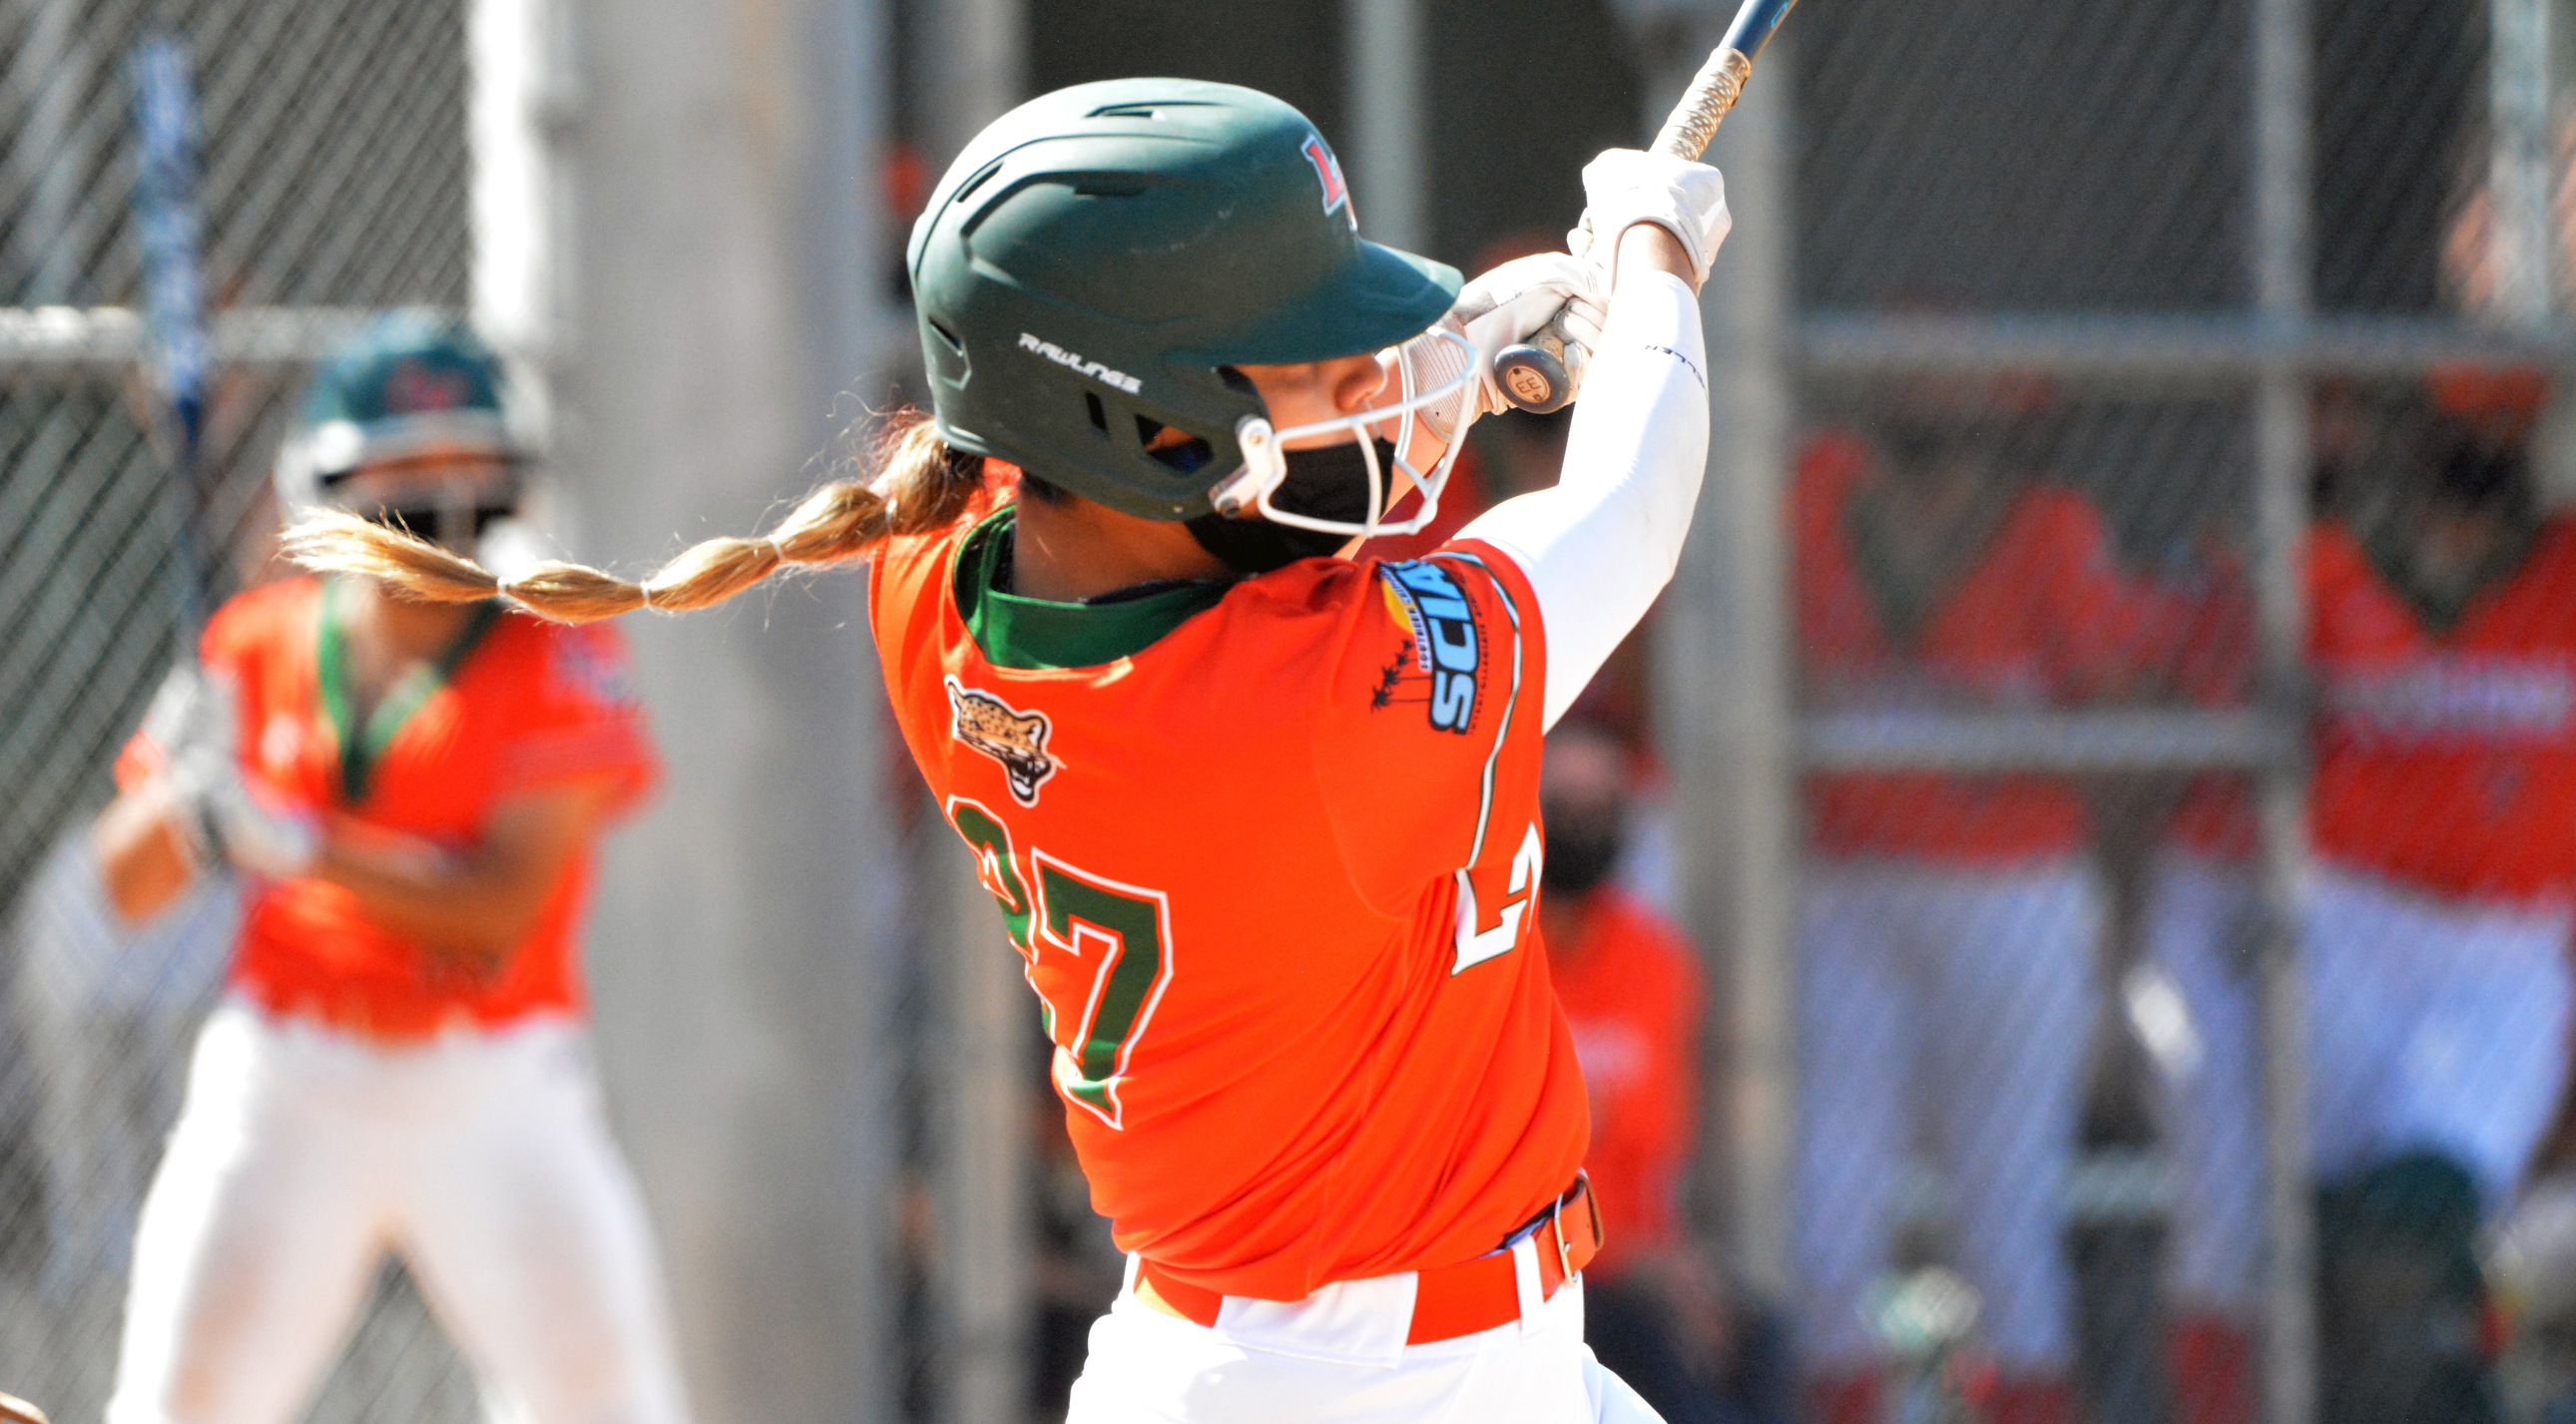 Jaylene Jaloma blasts a double at Chapman in the opening round of the SCIAC Tournament.